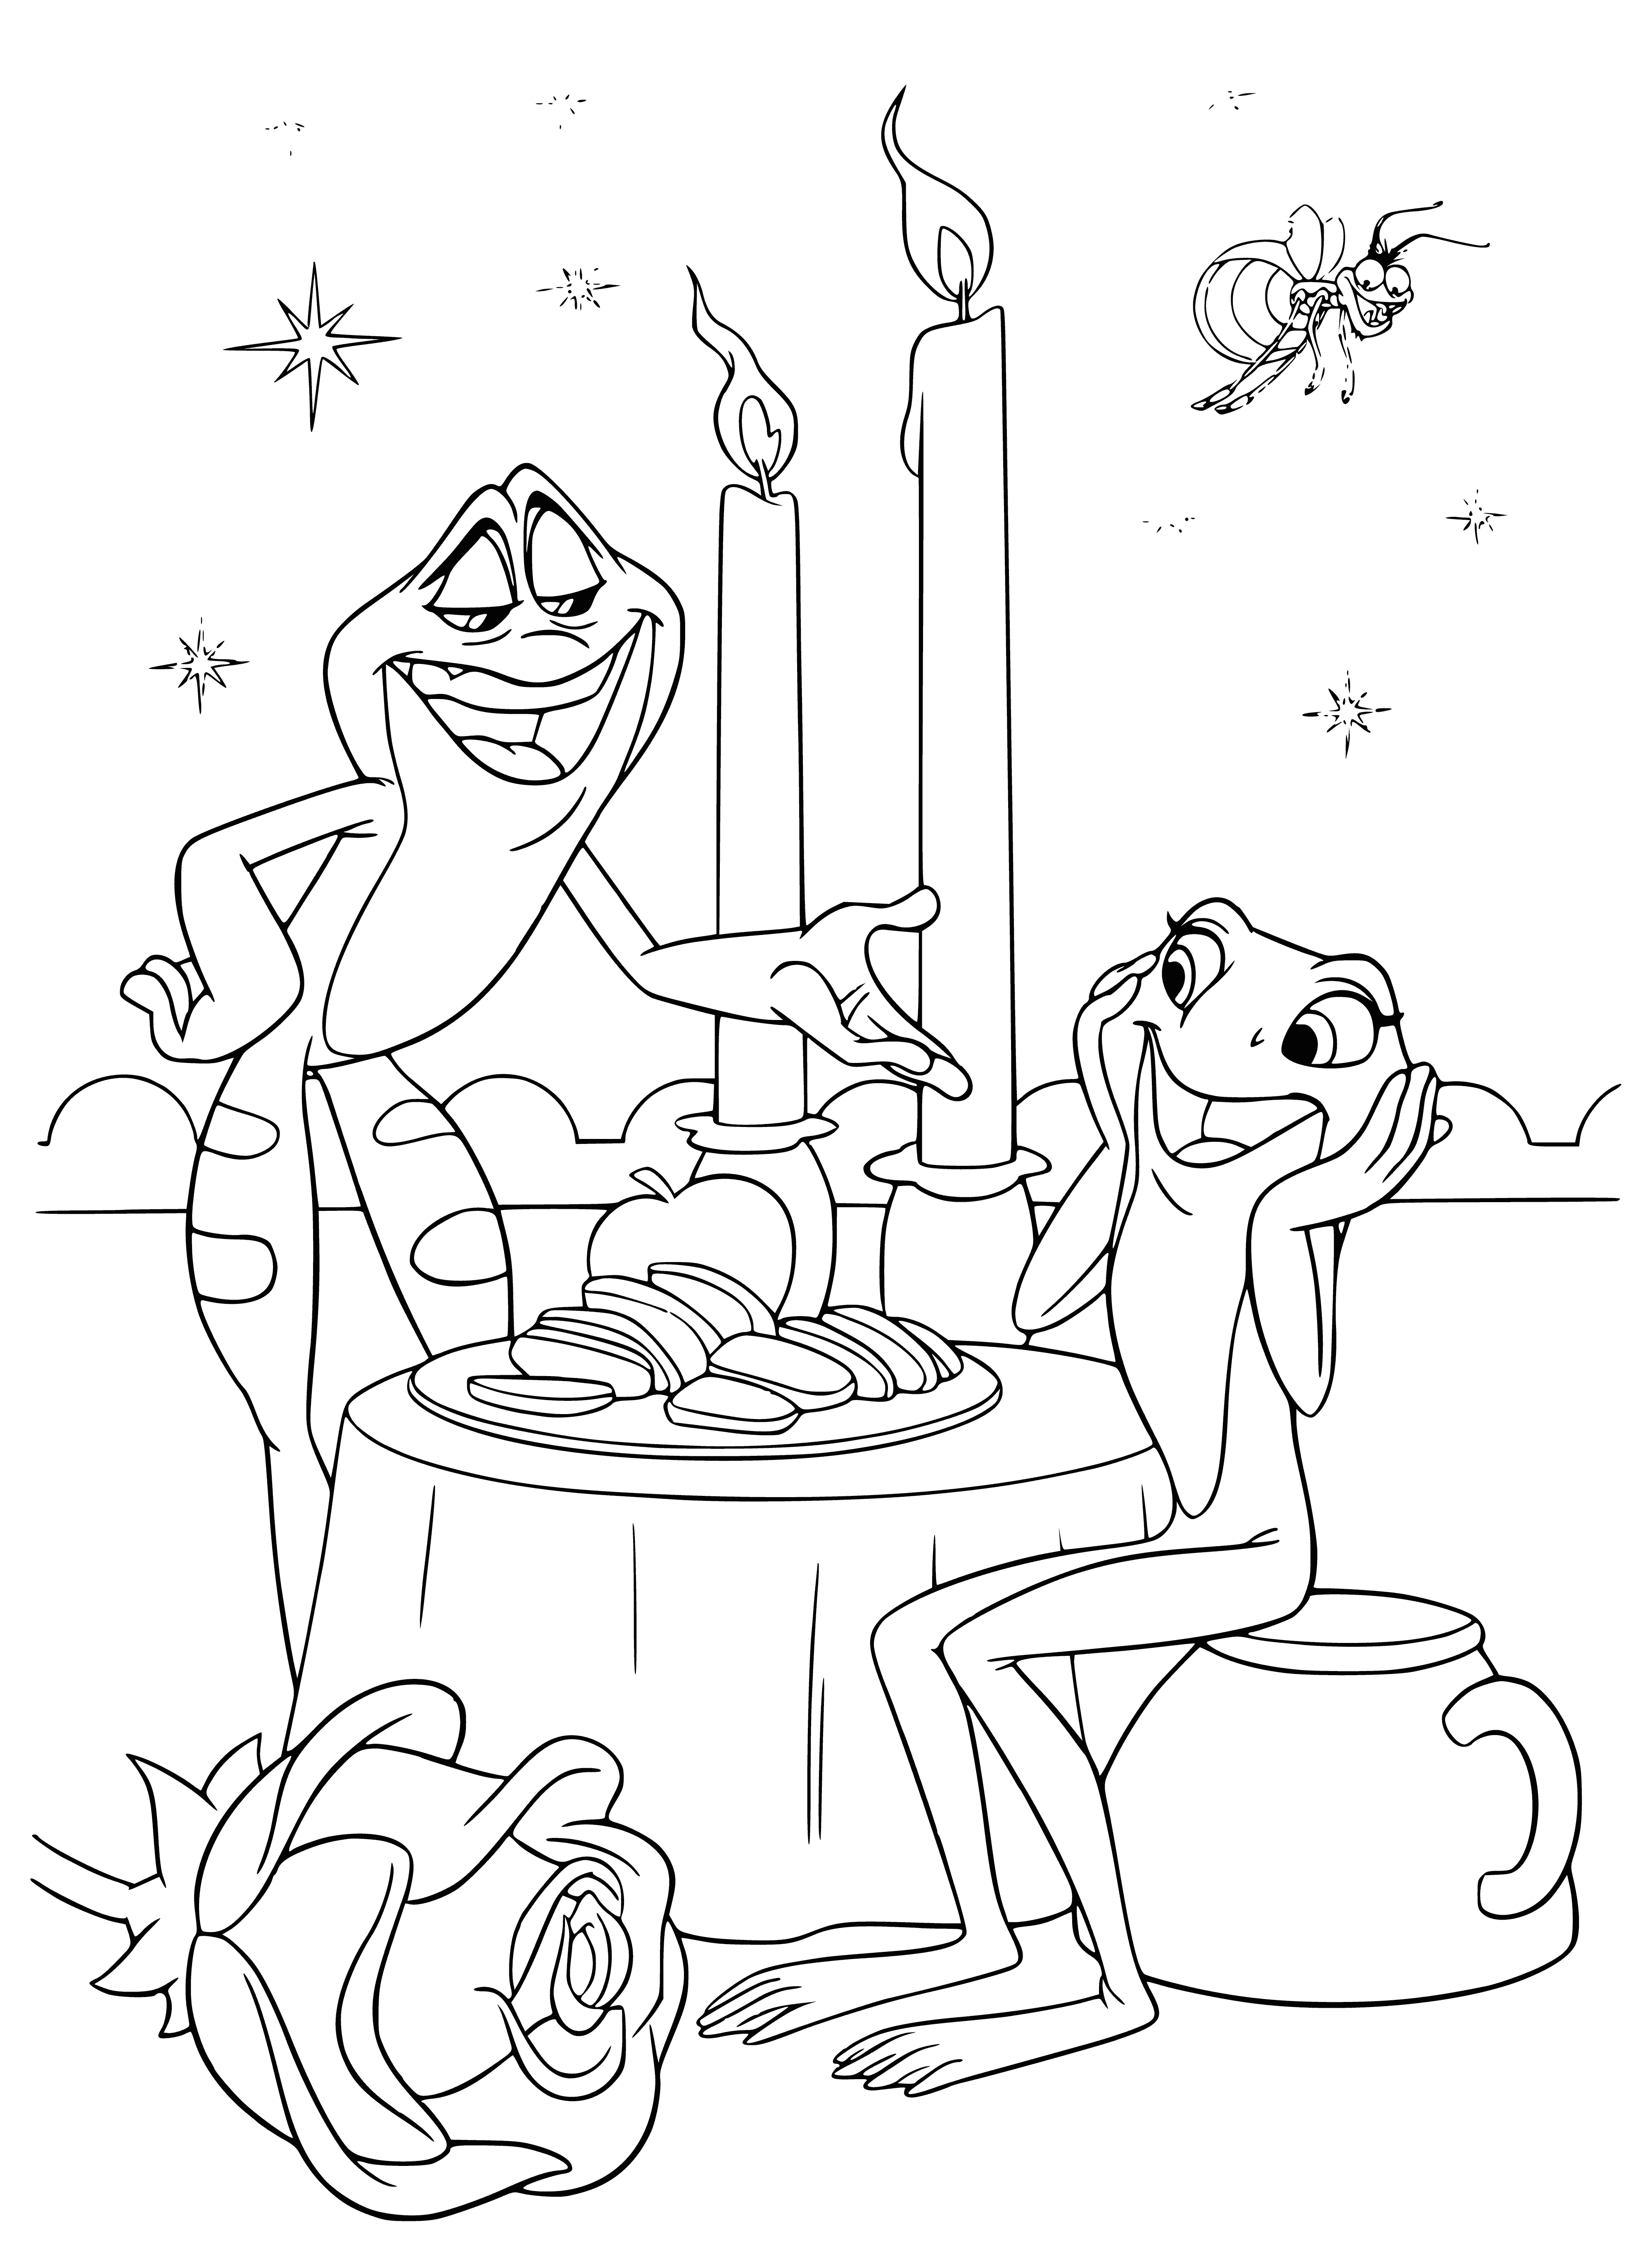 Romantic evening coloring page